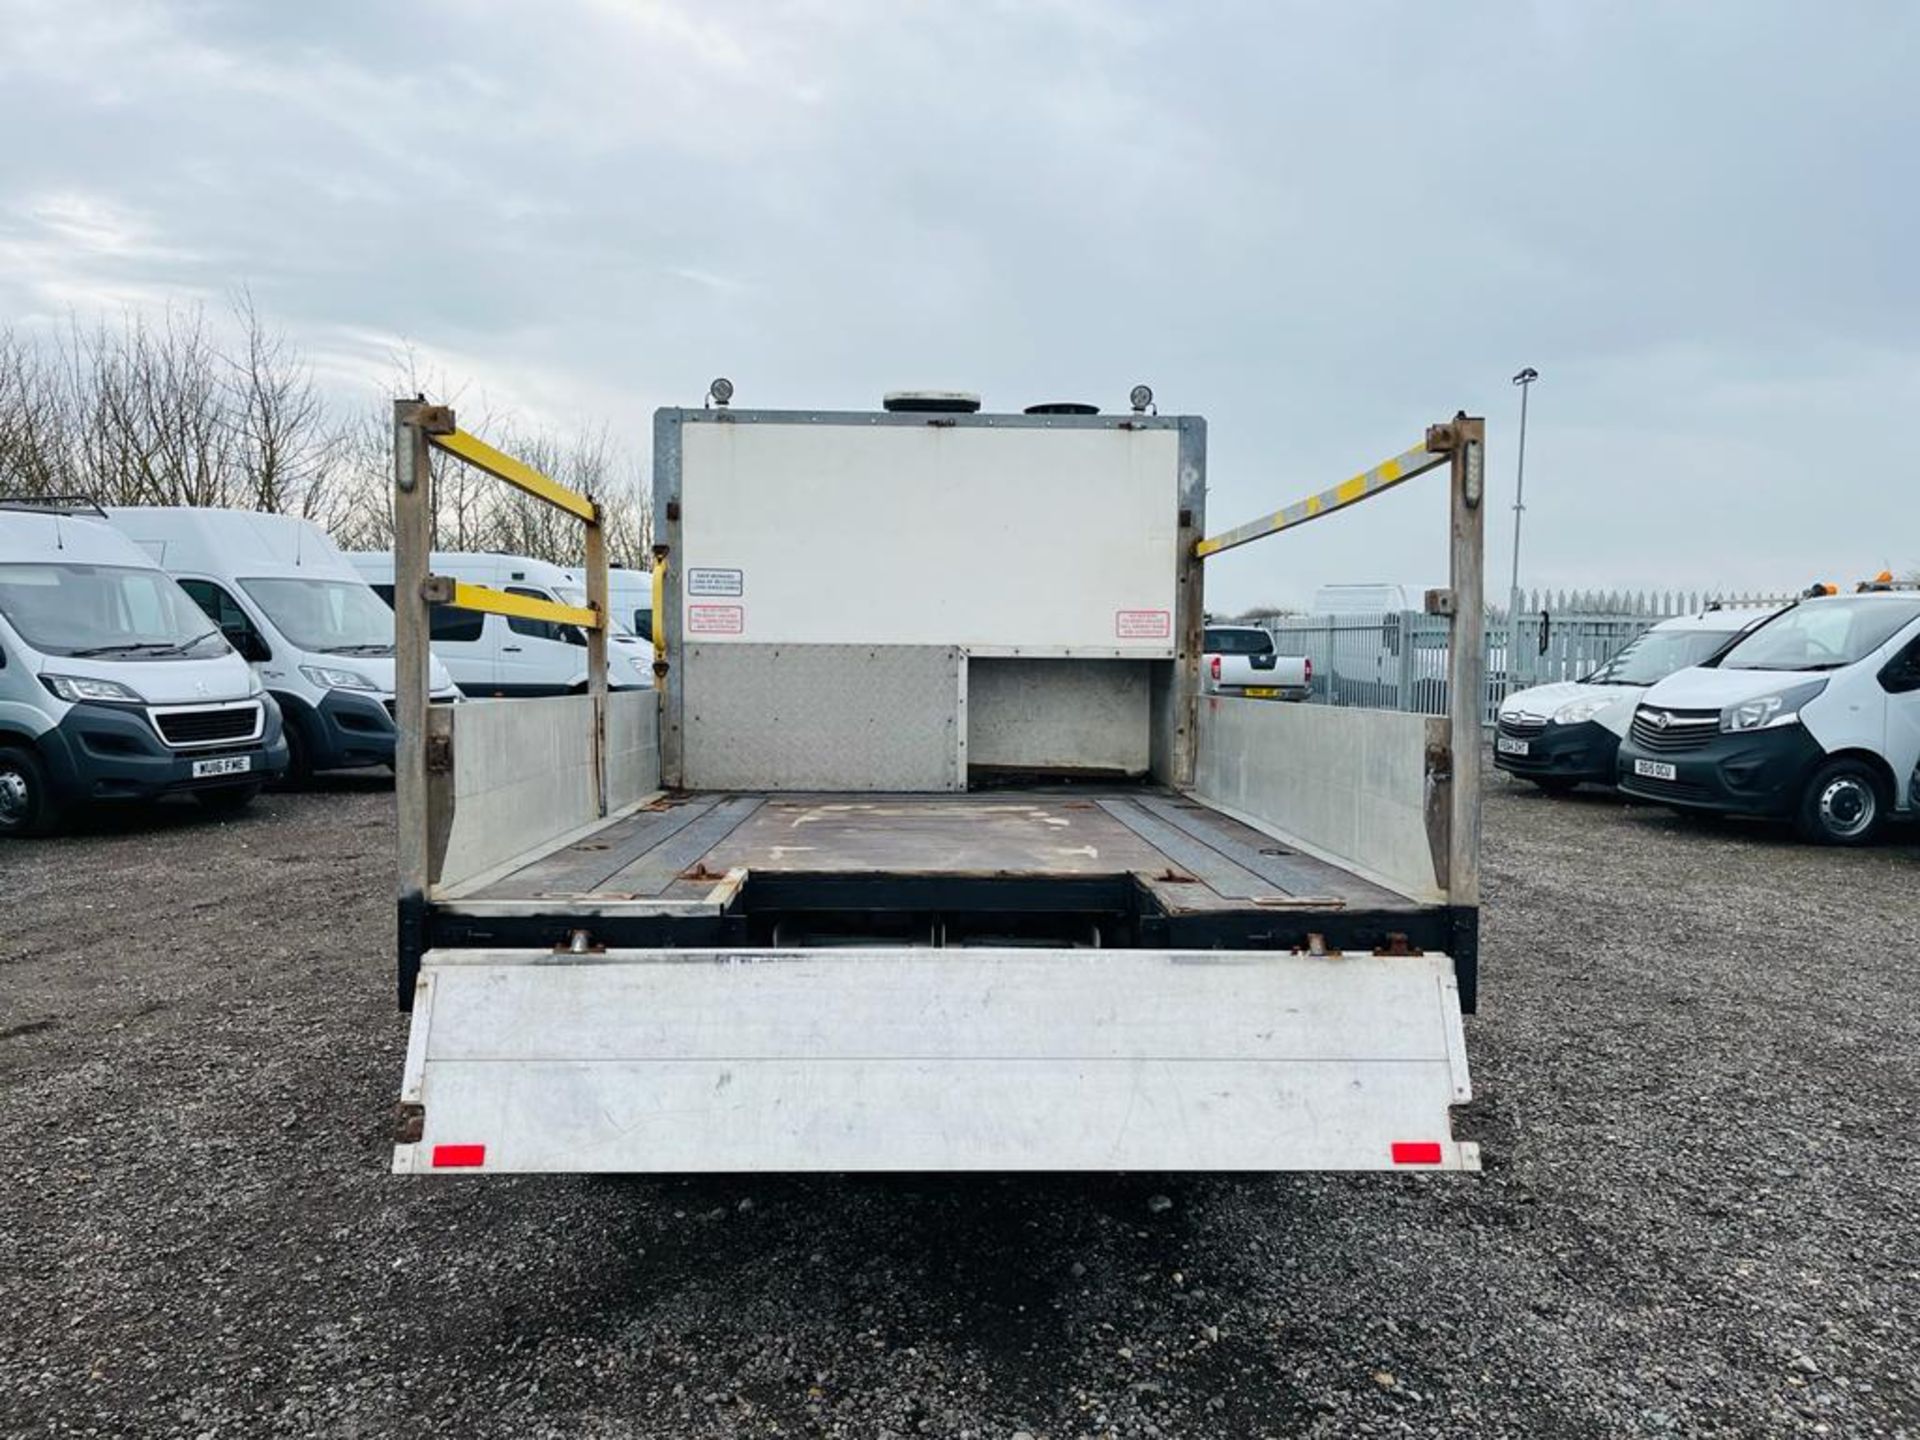 **ON SALE** Vauxhall Movano 2.3 CDTI BlueInjection F3500 L2 Dropside Alloy Body 2017 '67 Reg' - Image 7 of 19